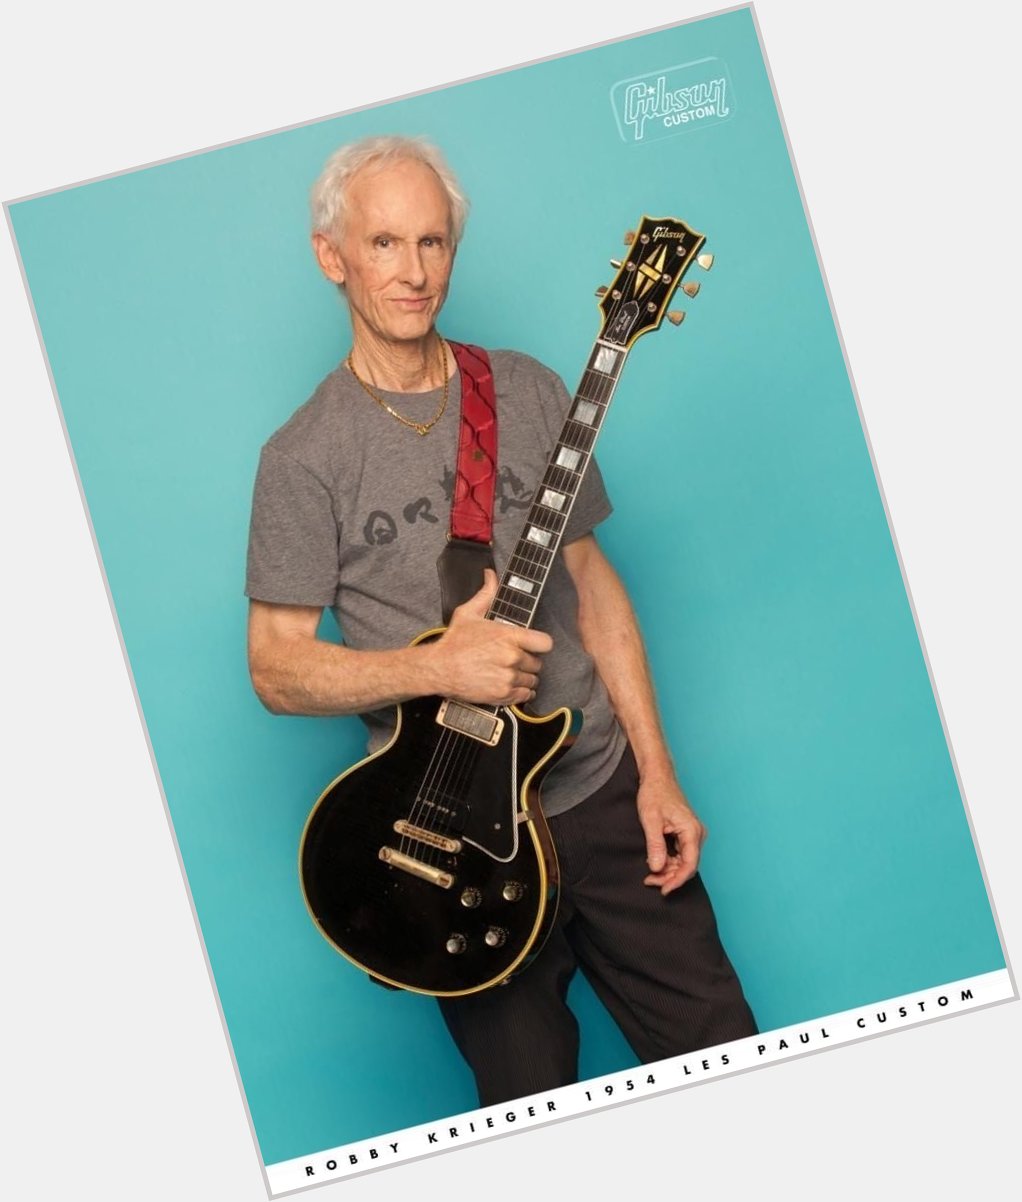 Happy Birthday to Robby Krieger, 76 today 